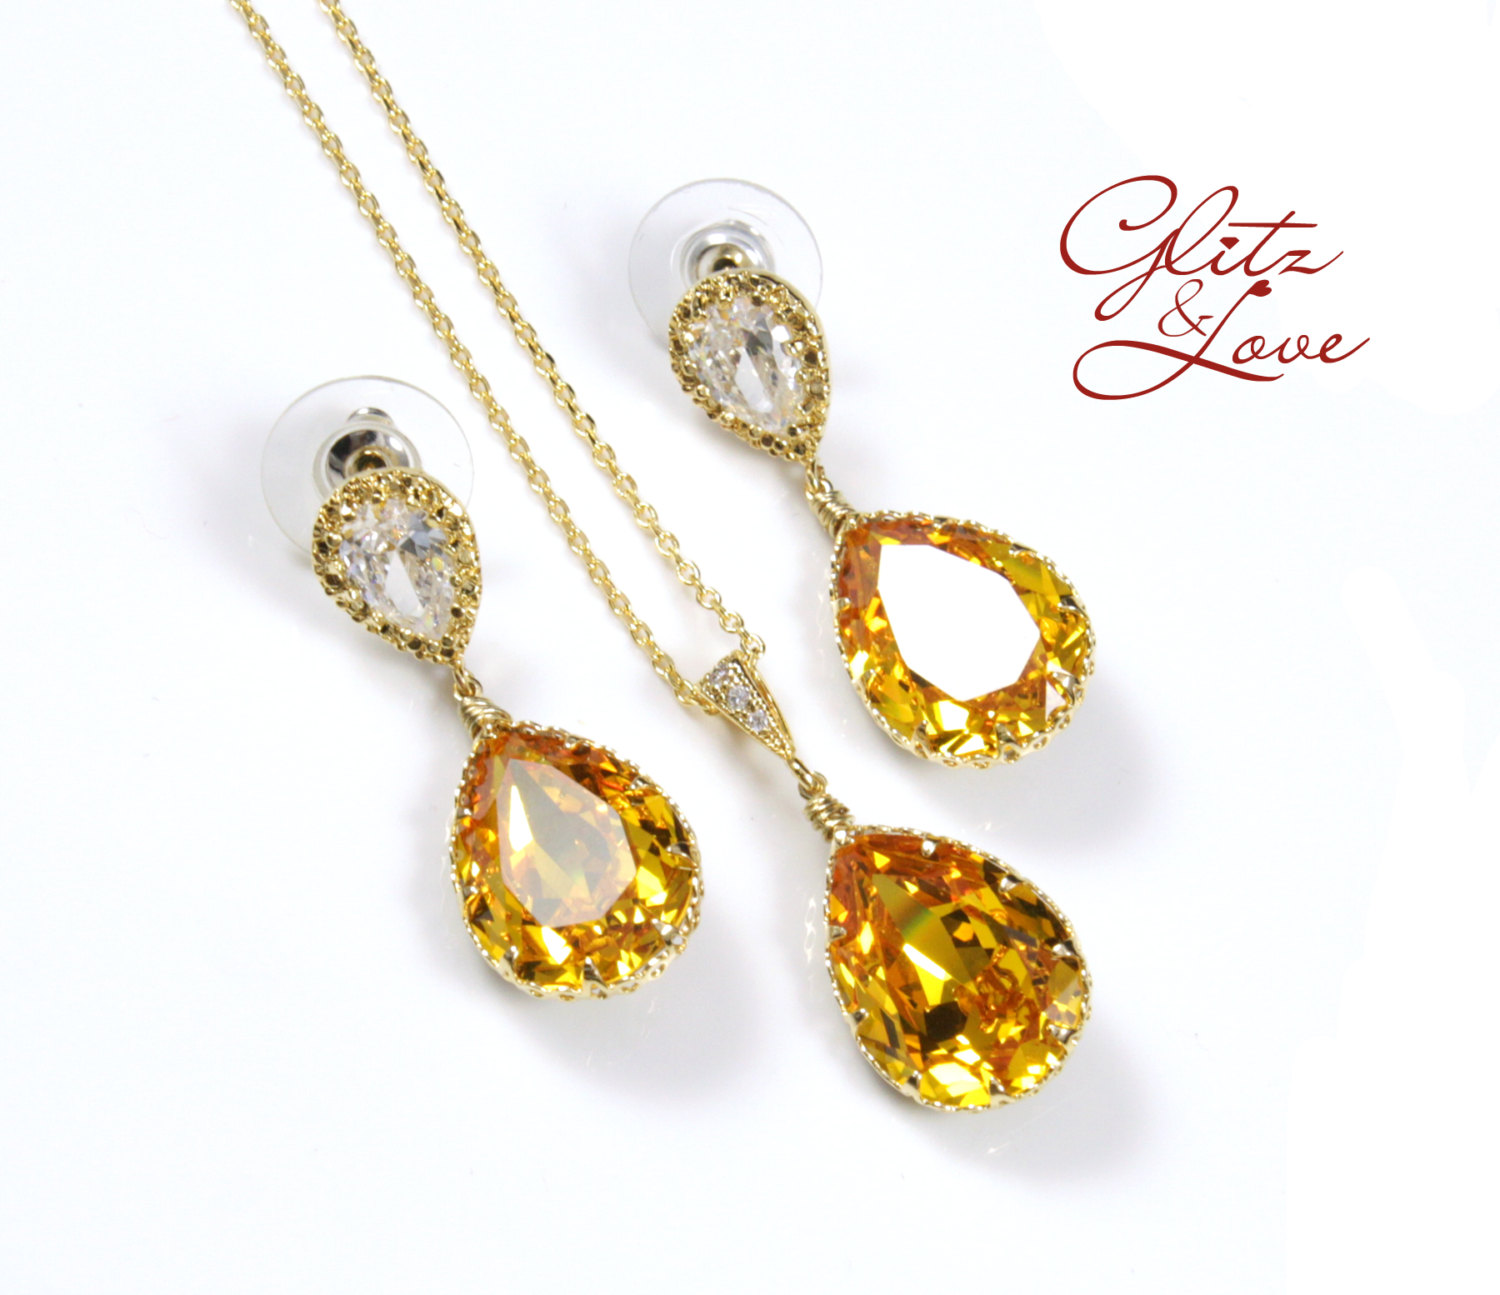 Yellow Earrings and Bracelet Set from Glitz & Love